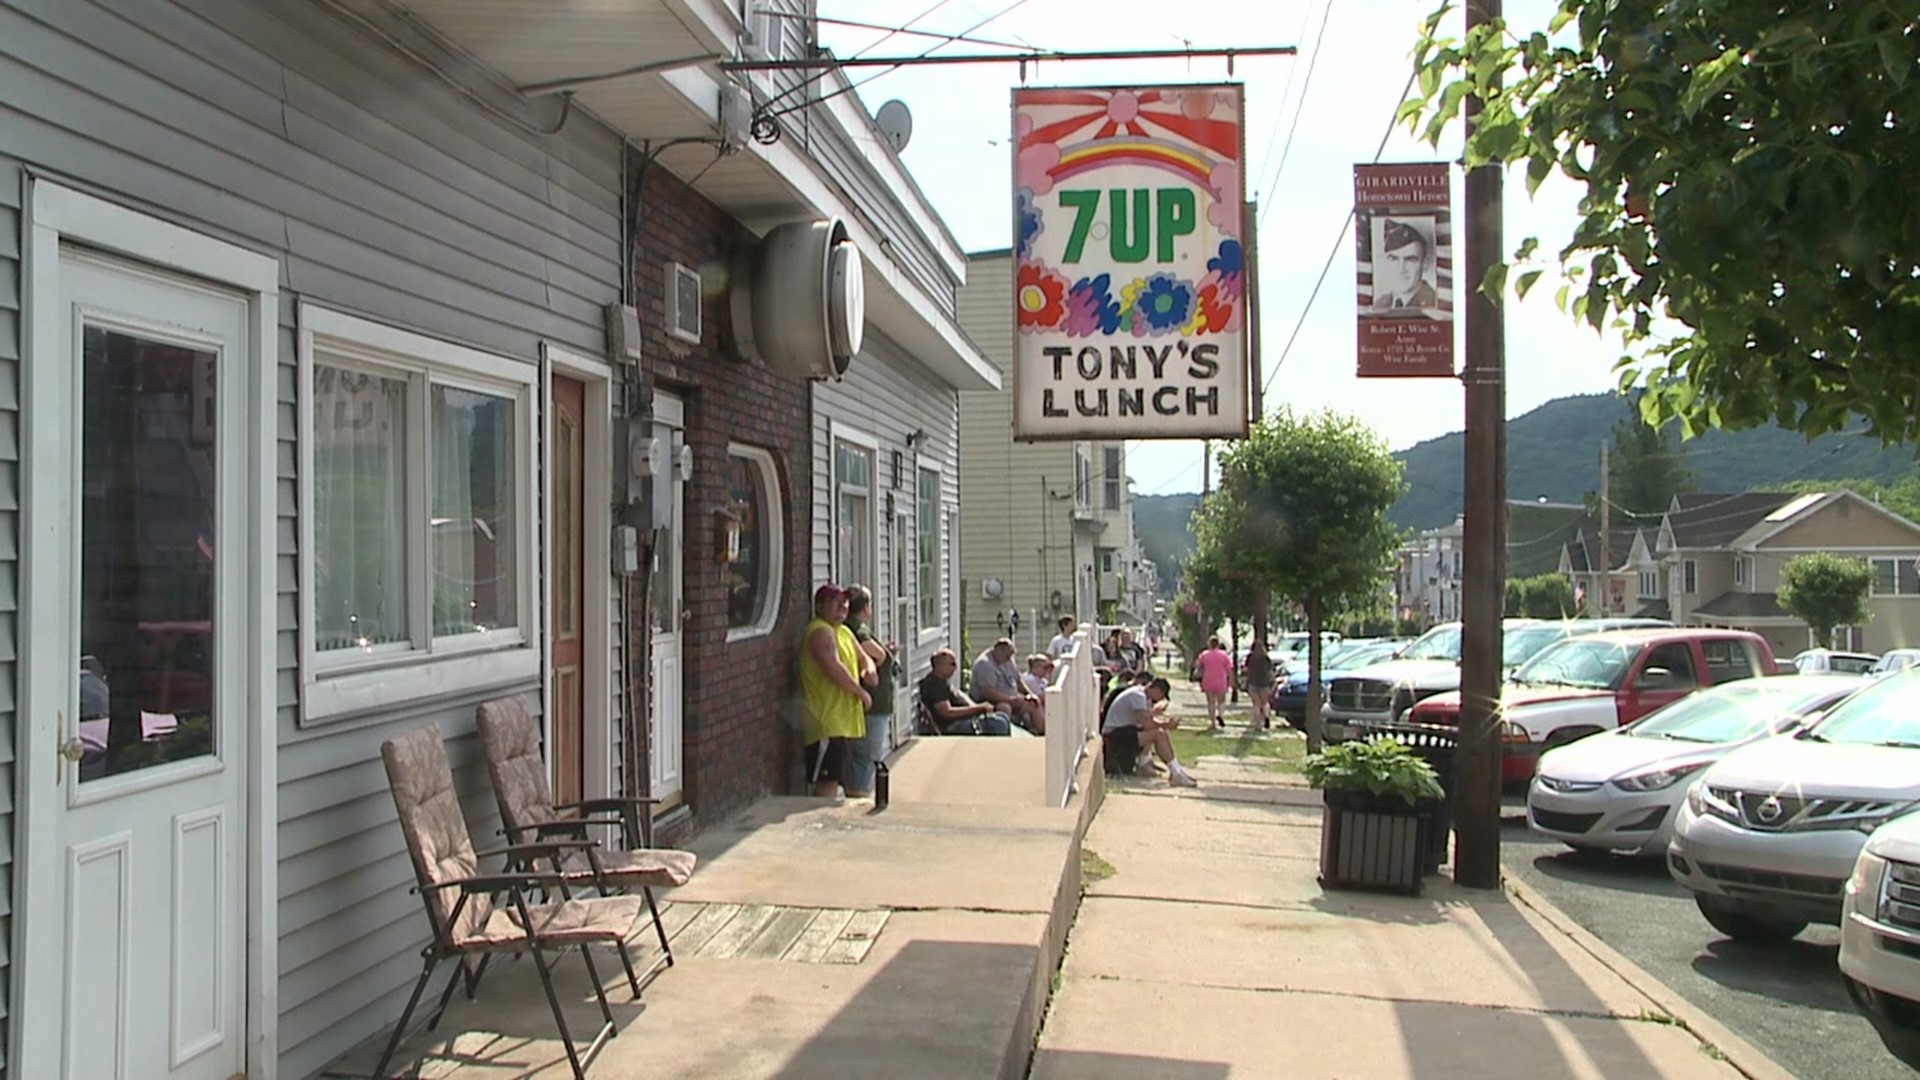 Tony's Lunch in Girardville was ready to serve up 500 burgers on the first night back since COVID-19 closed its doors.